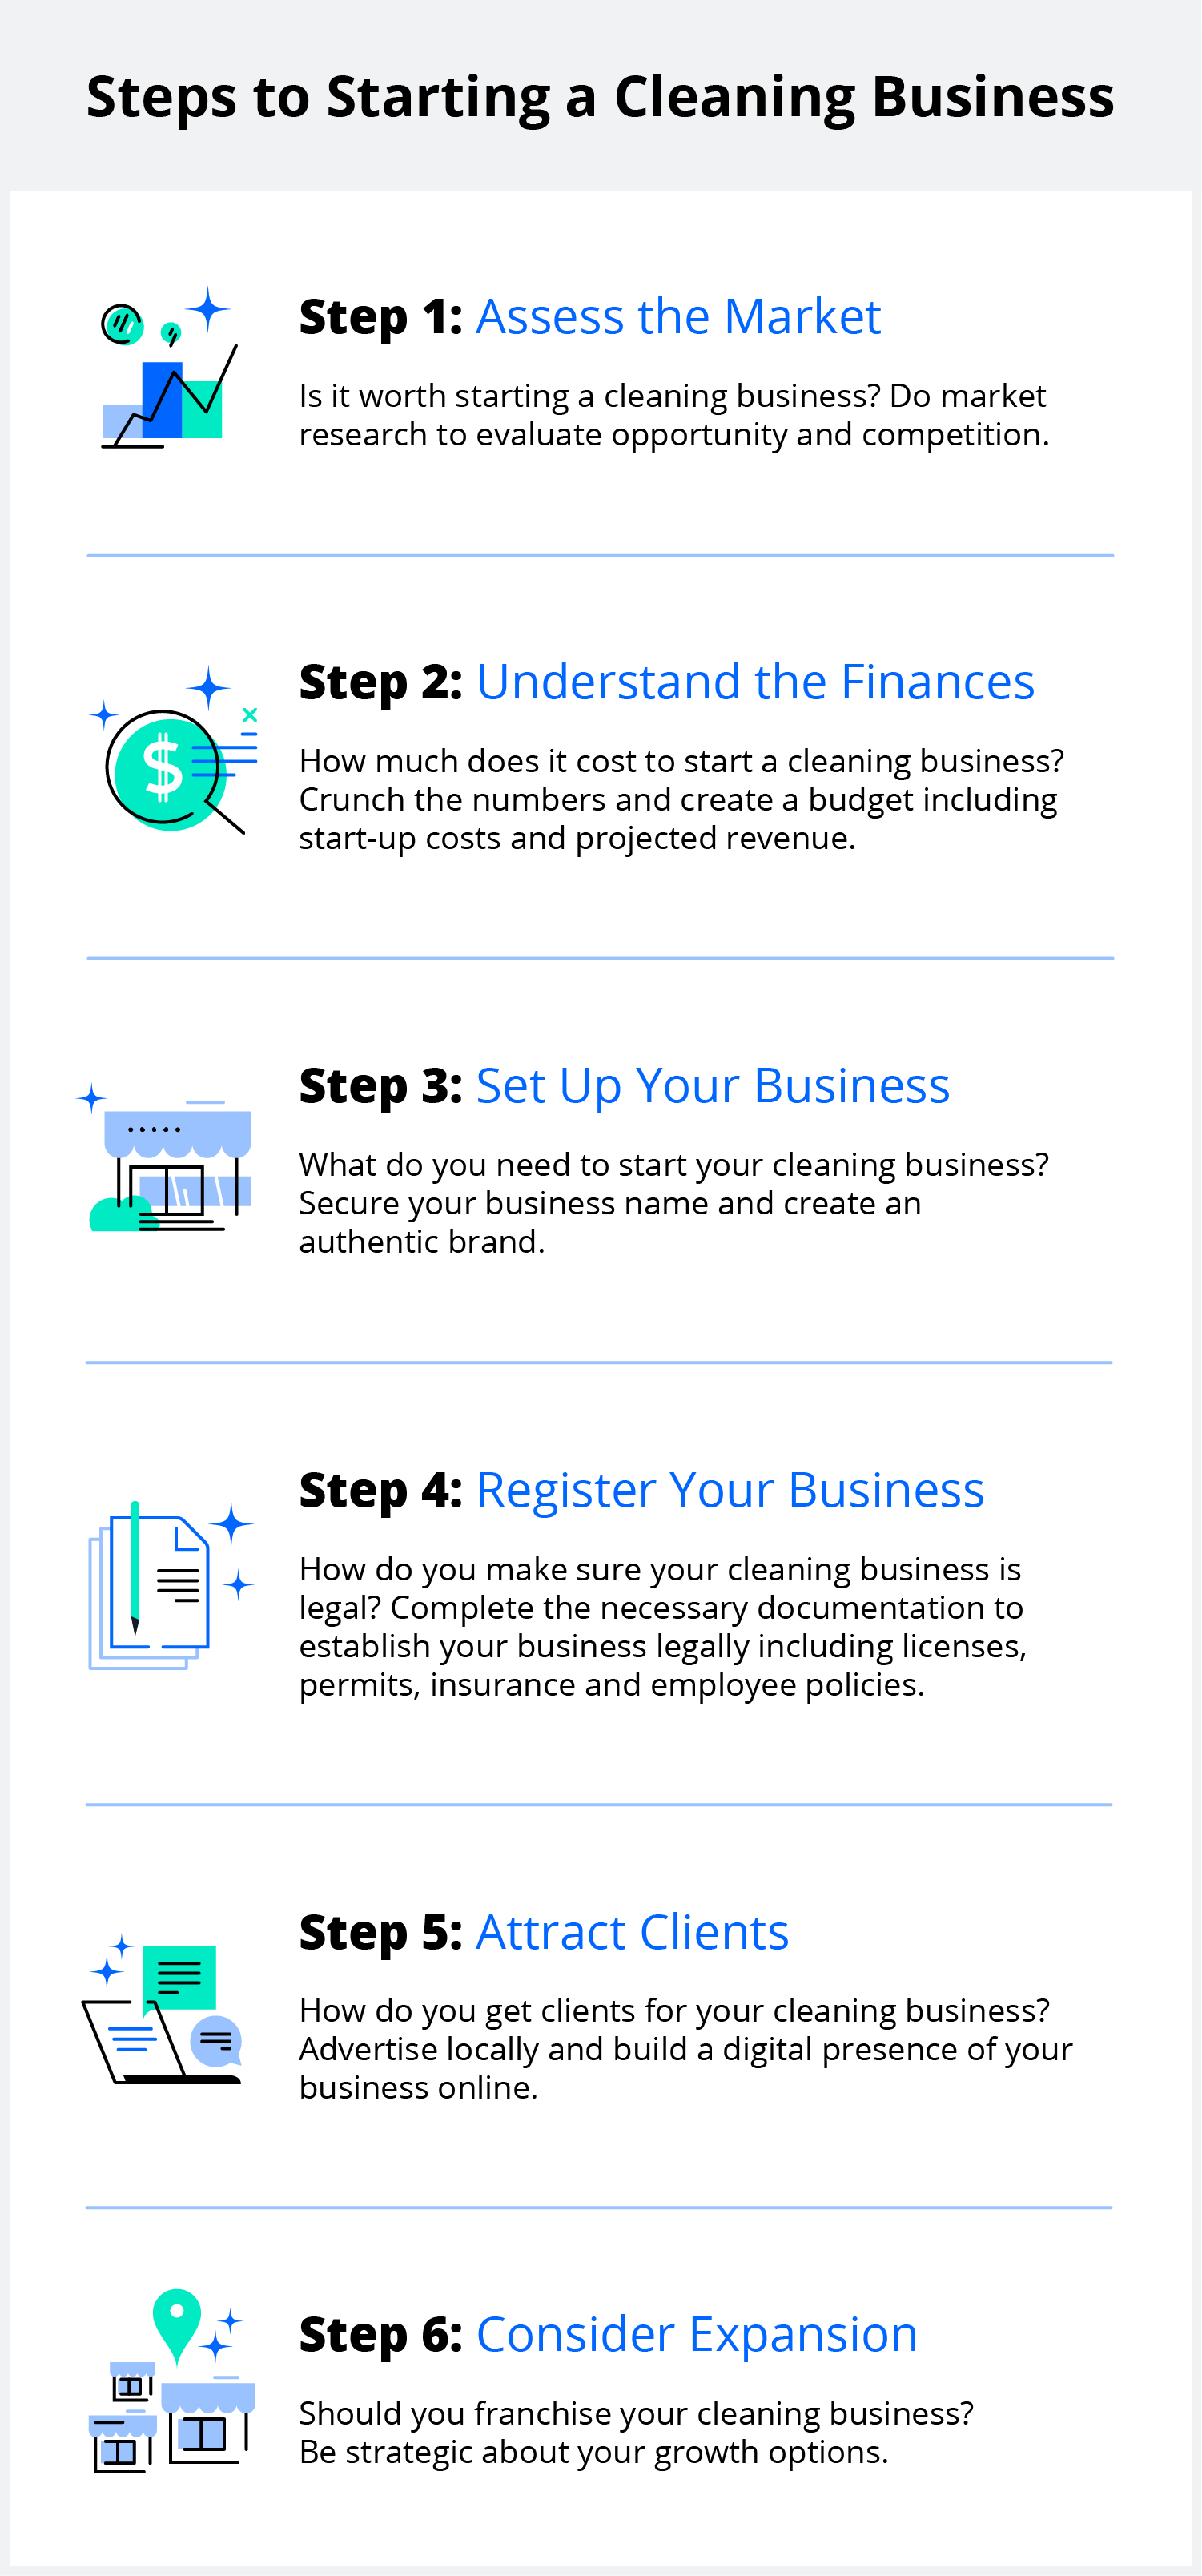 How to Start a Cleaning Business (+ Checklist)  legalzoom.com